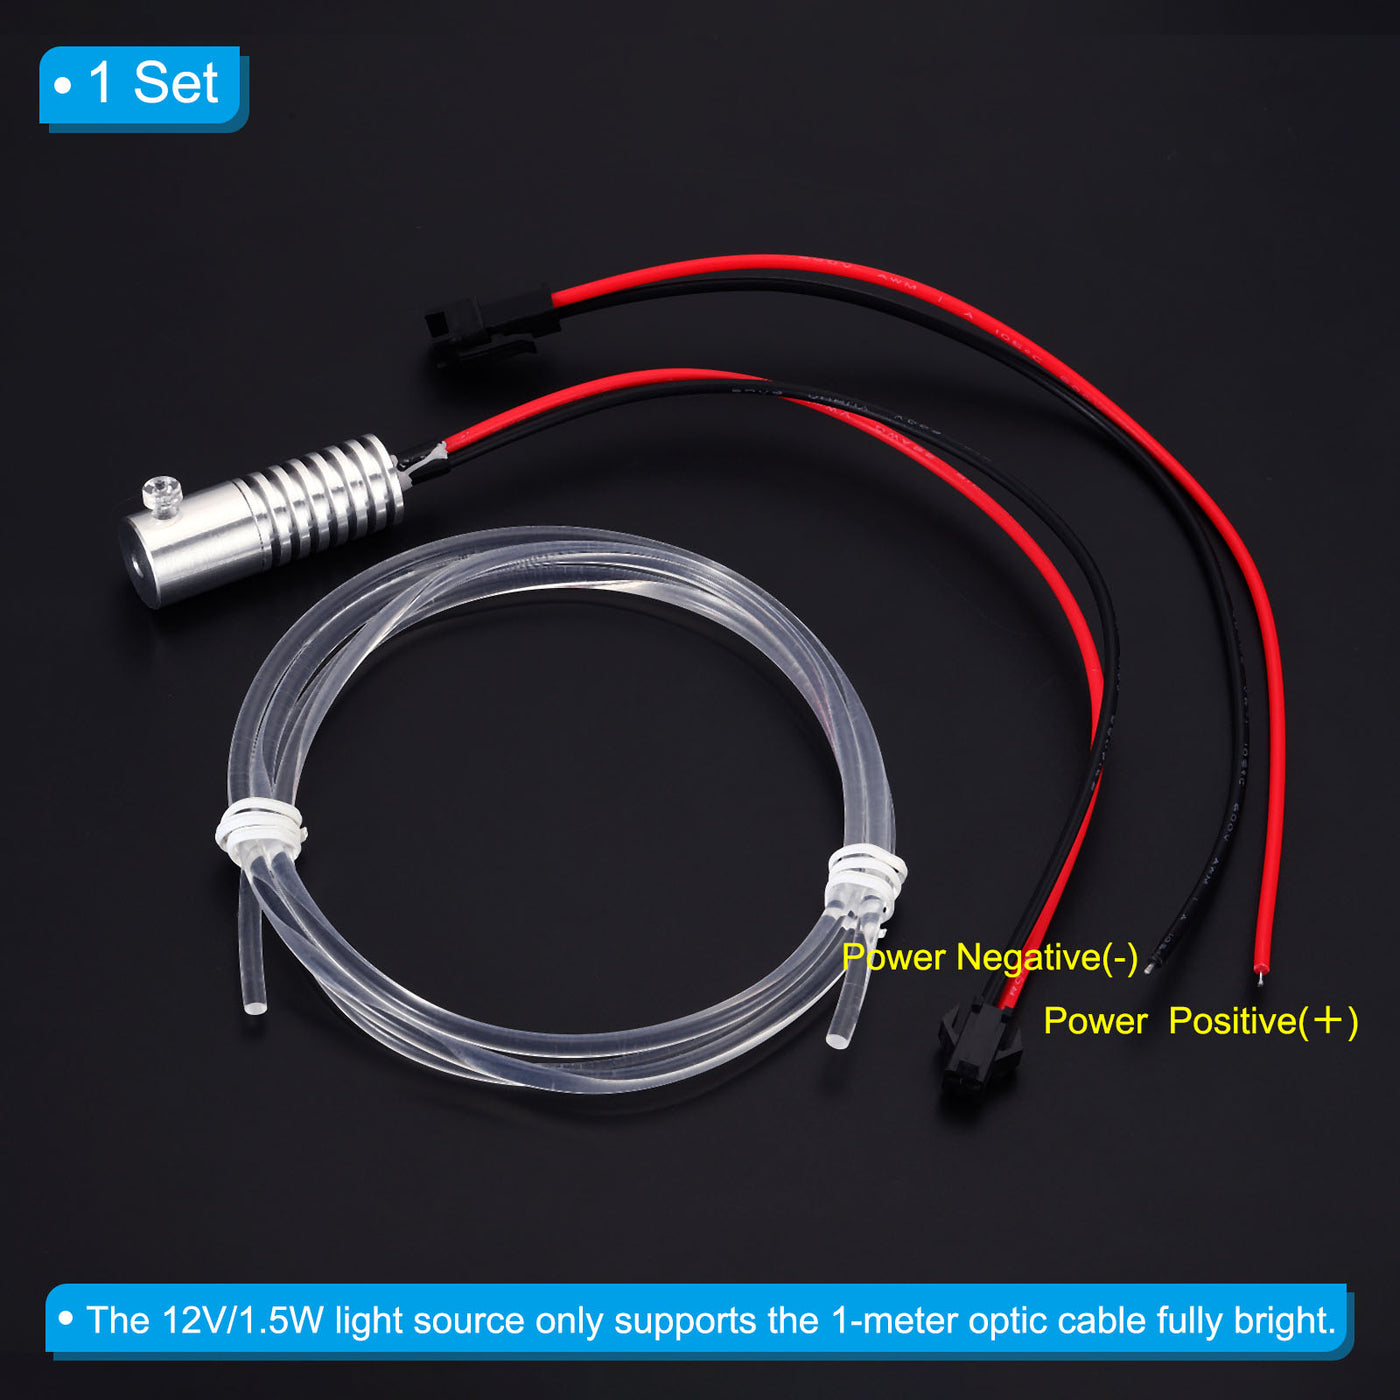 Harfington 4mm 1m PMMA Side Glow Fiber Optic Cable Kit, with LED Aluminum Illuminator 12V 1.5W Guide Light Source Decoration for Home DIY Lighting, Colorful